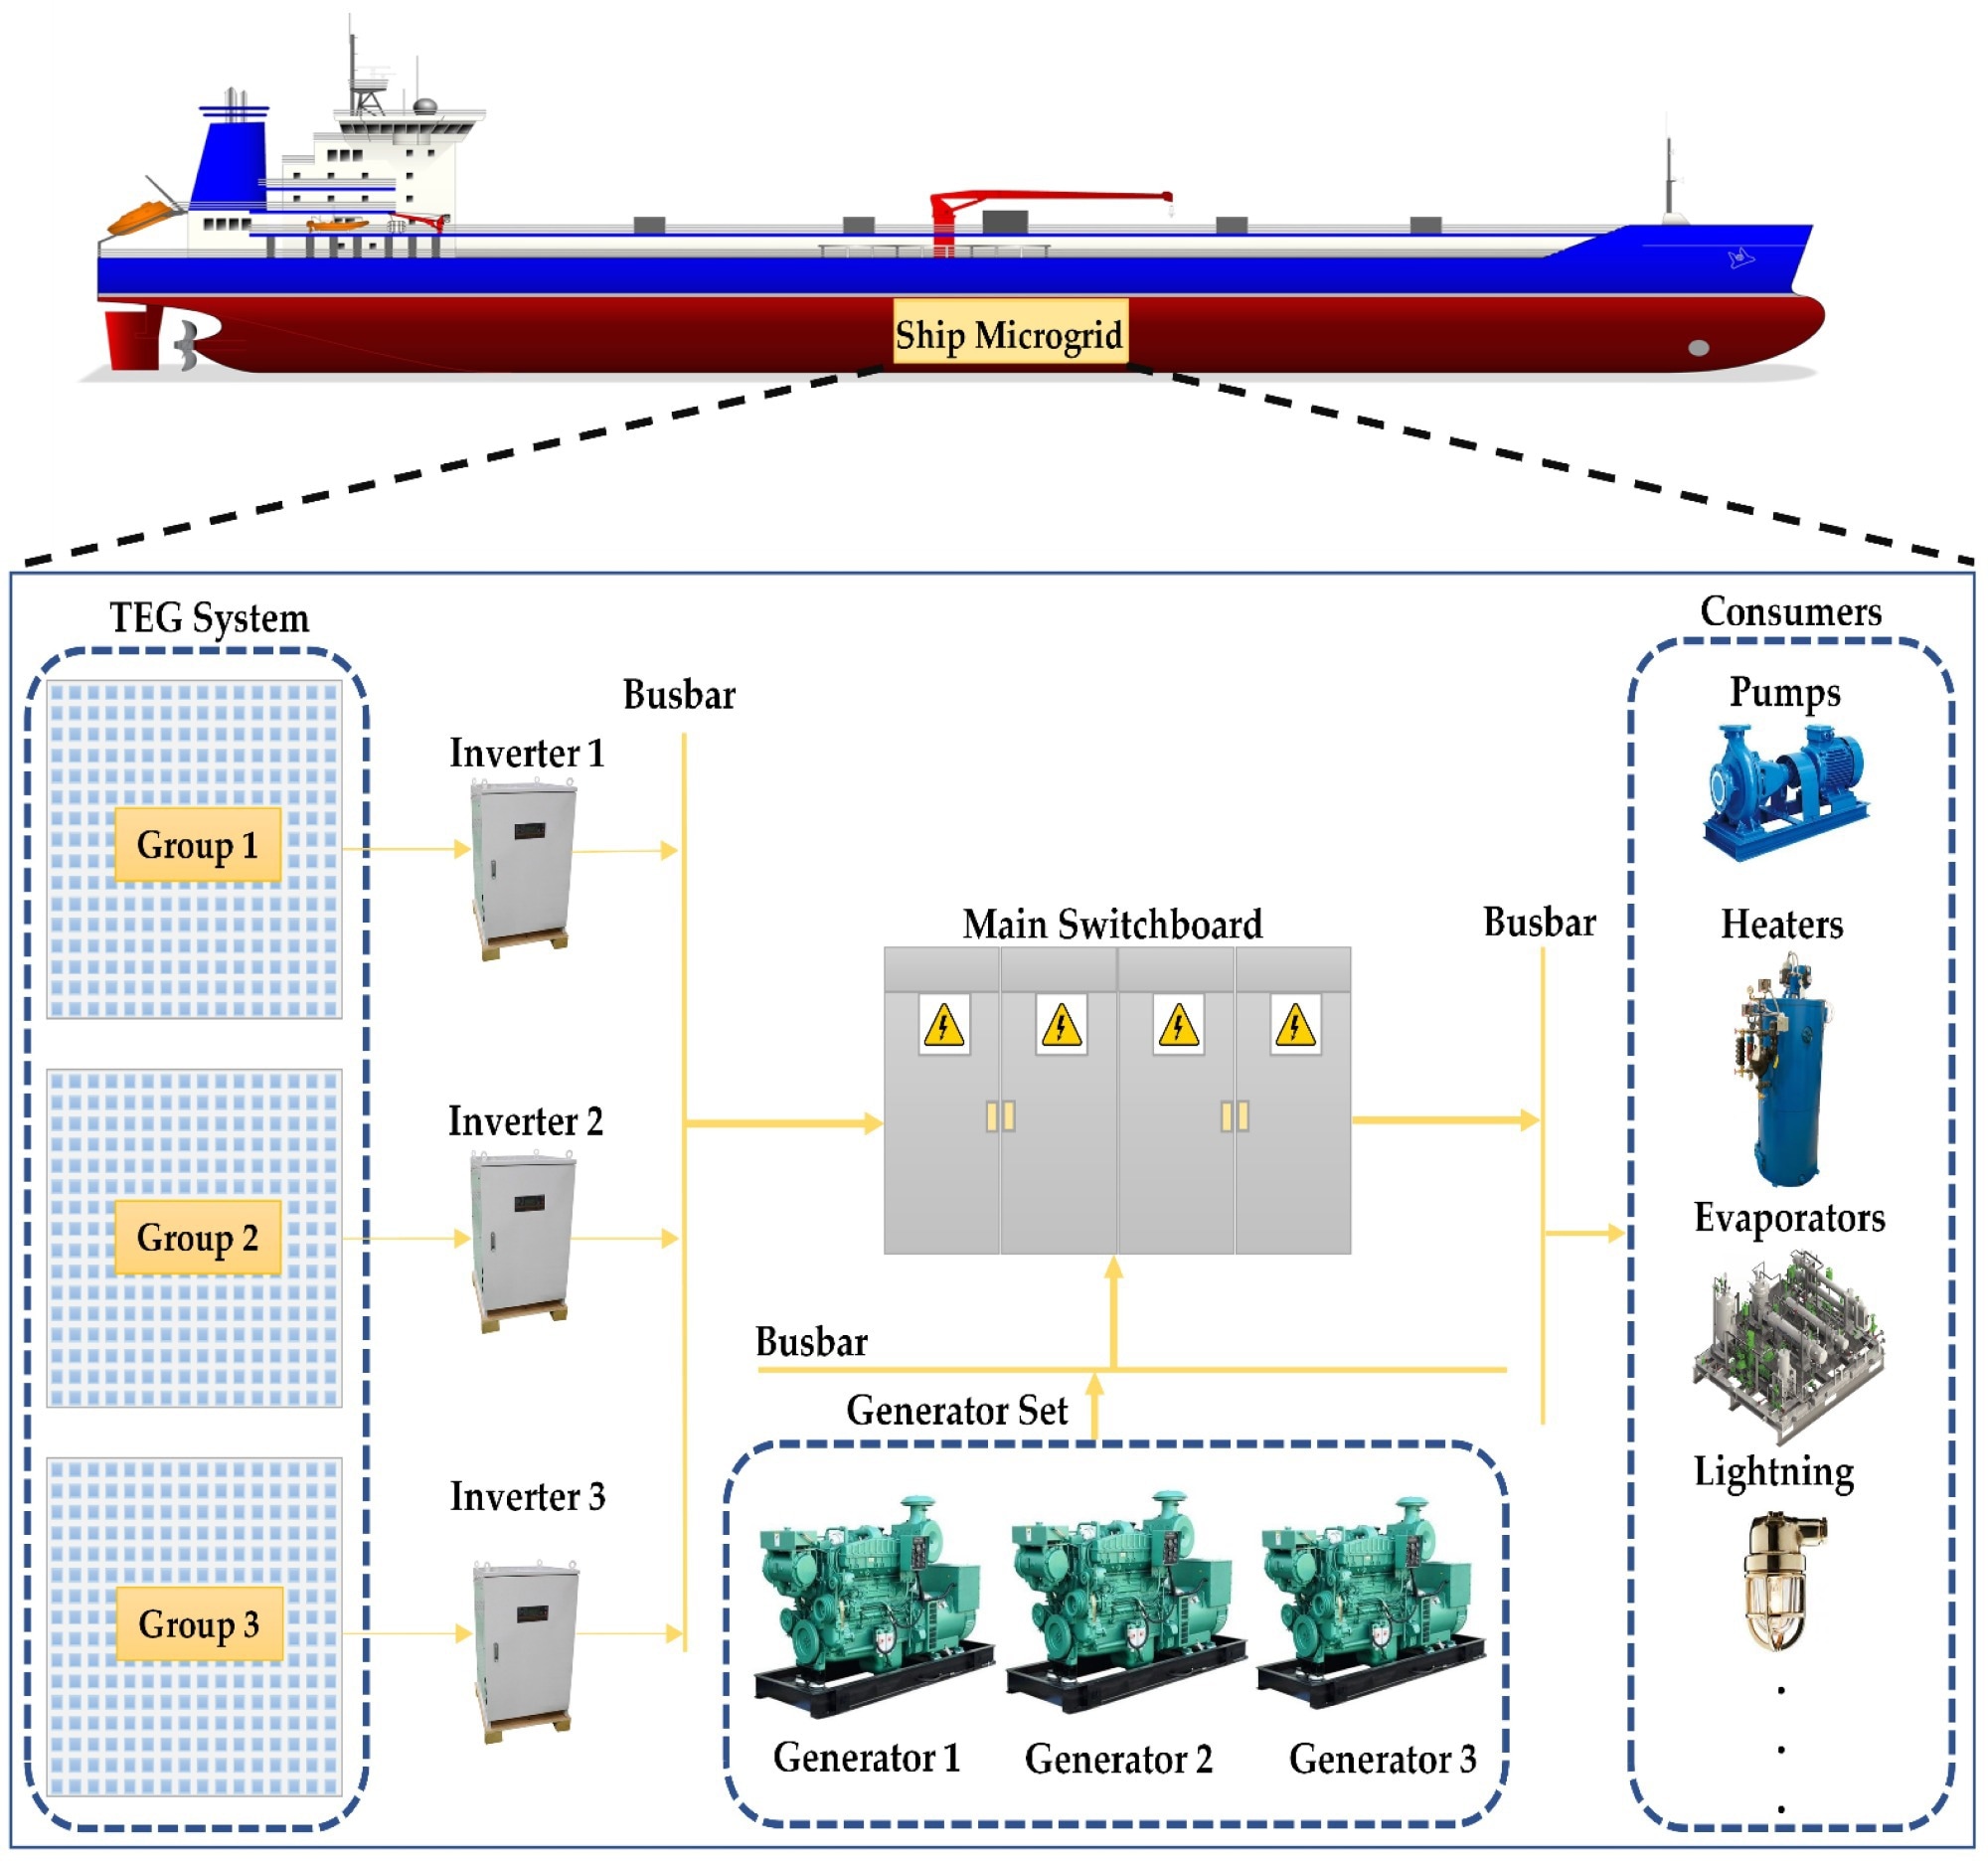 The conceptual design for integrating the TEG system into the ship’s microgrid.